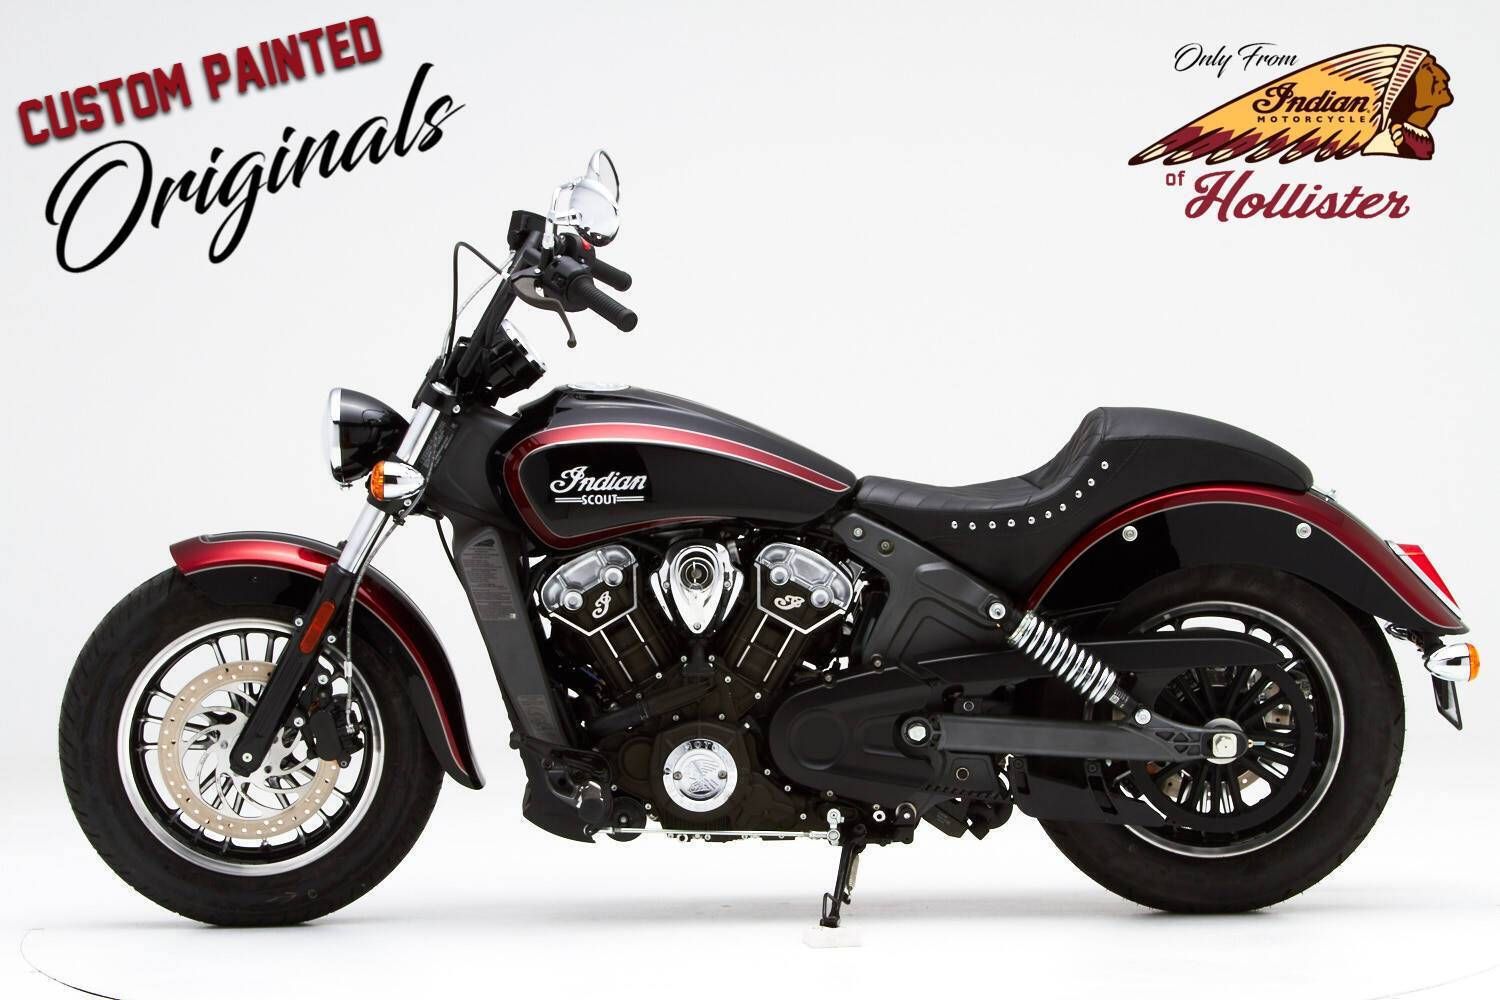 2022 Indian Scout® ABS in Hollister, California - Photo 1